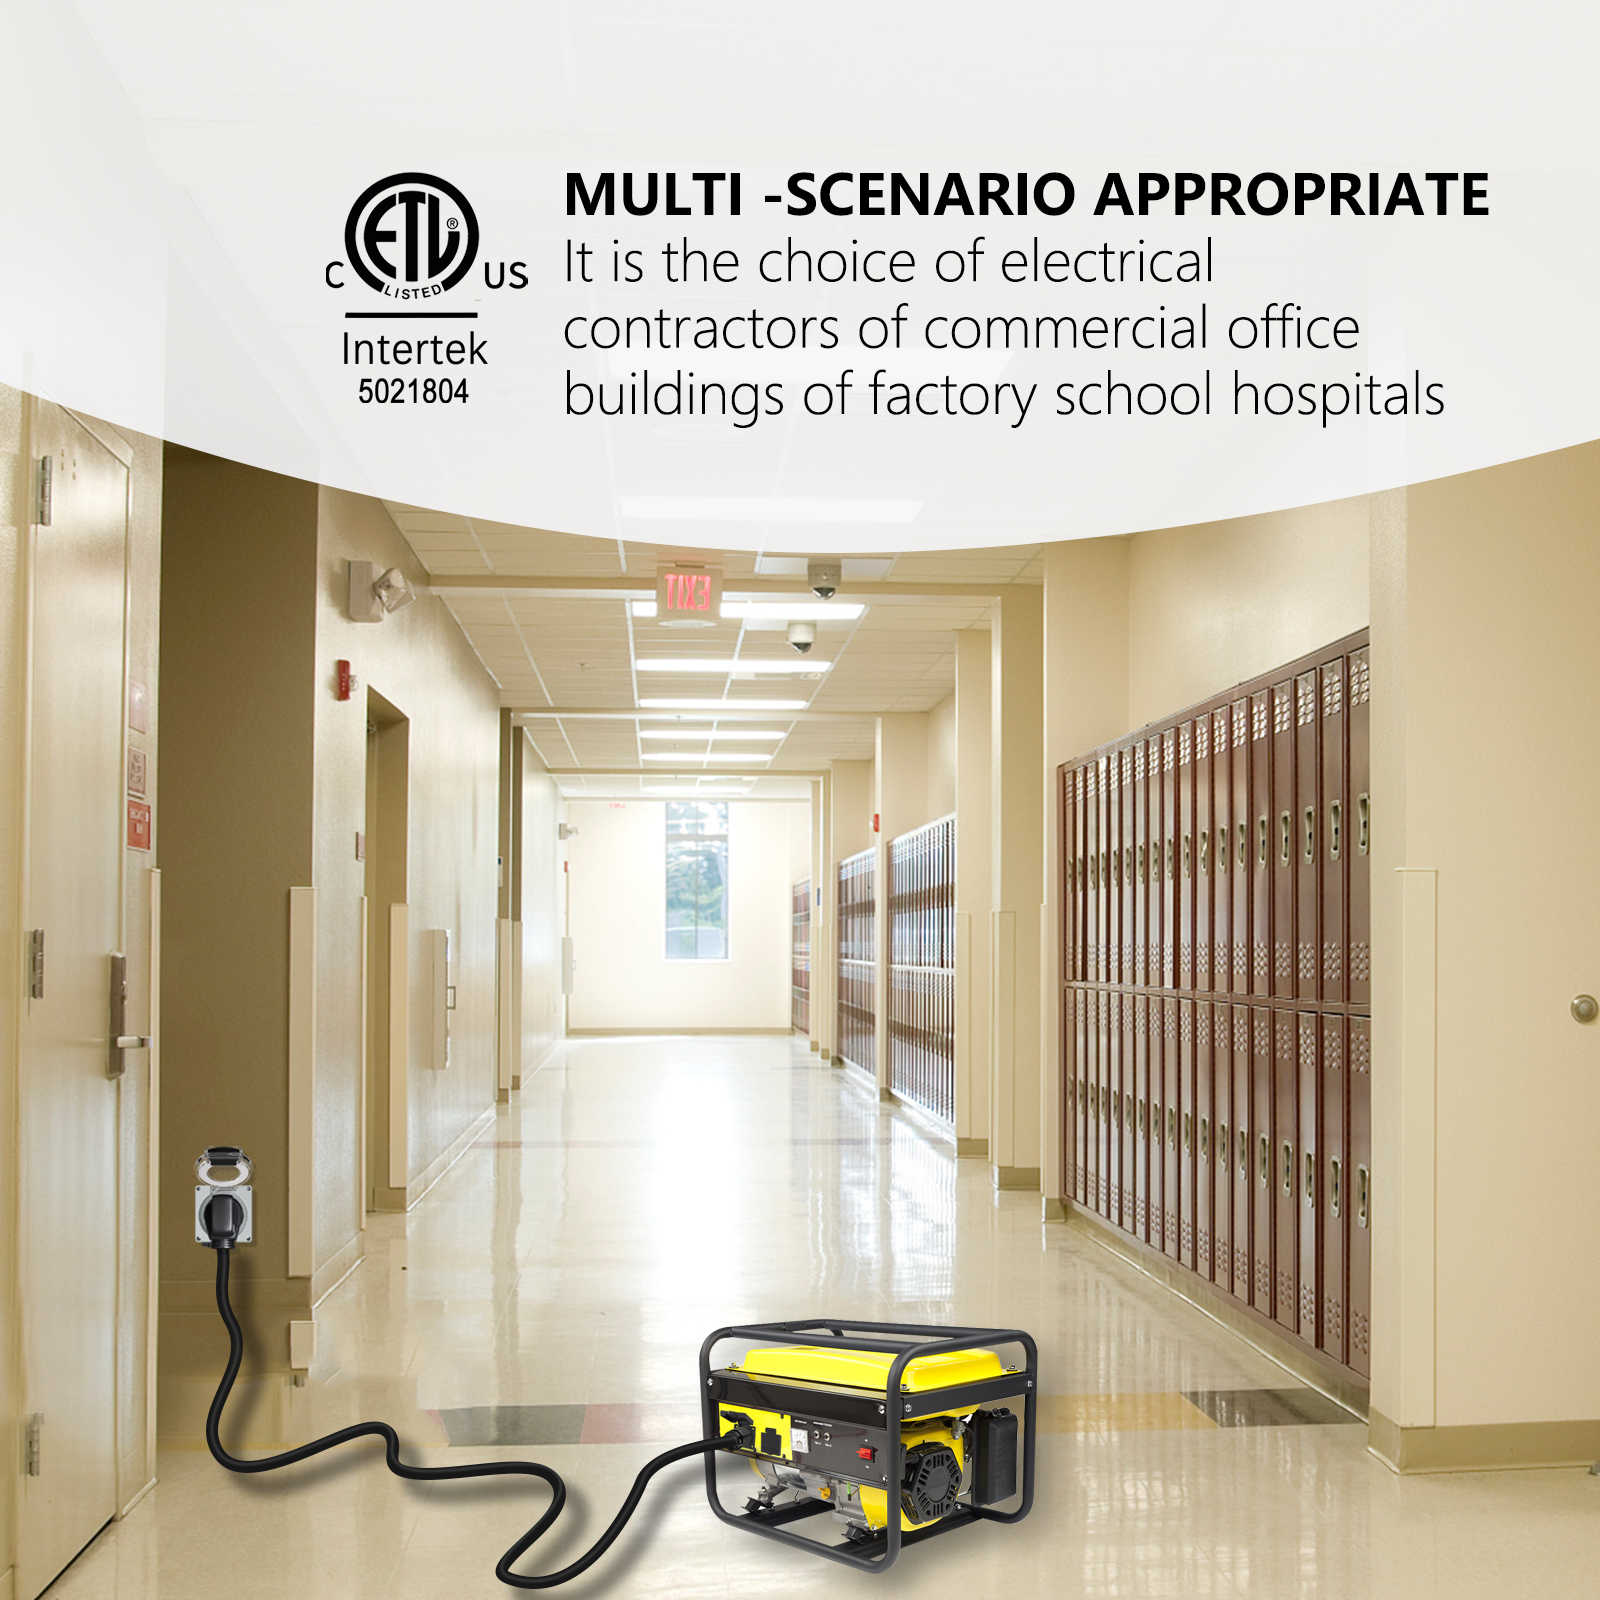 The 5-30R power outlet box is appropriate to multiple scenarios